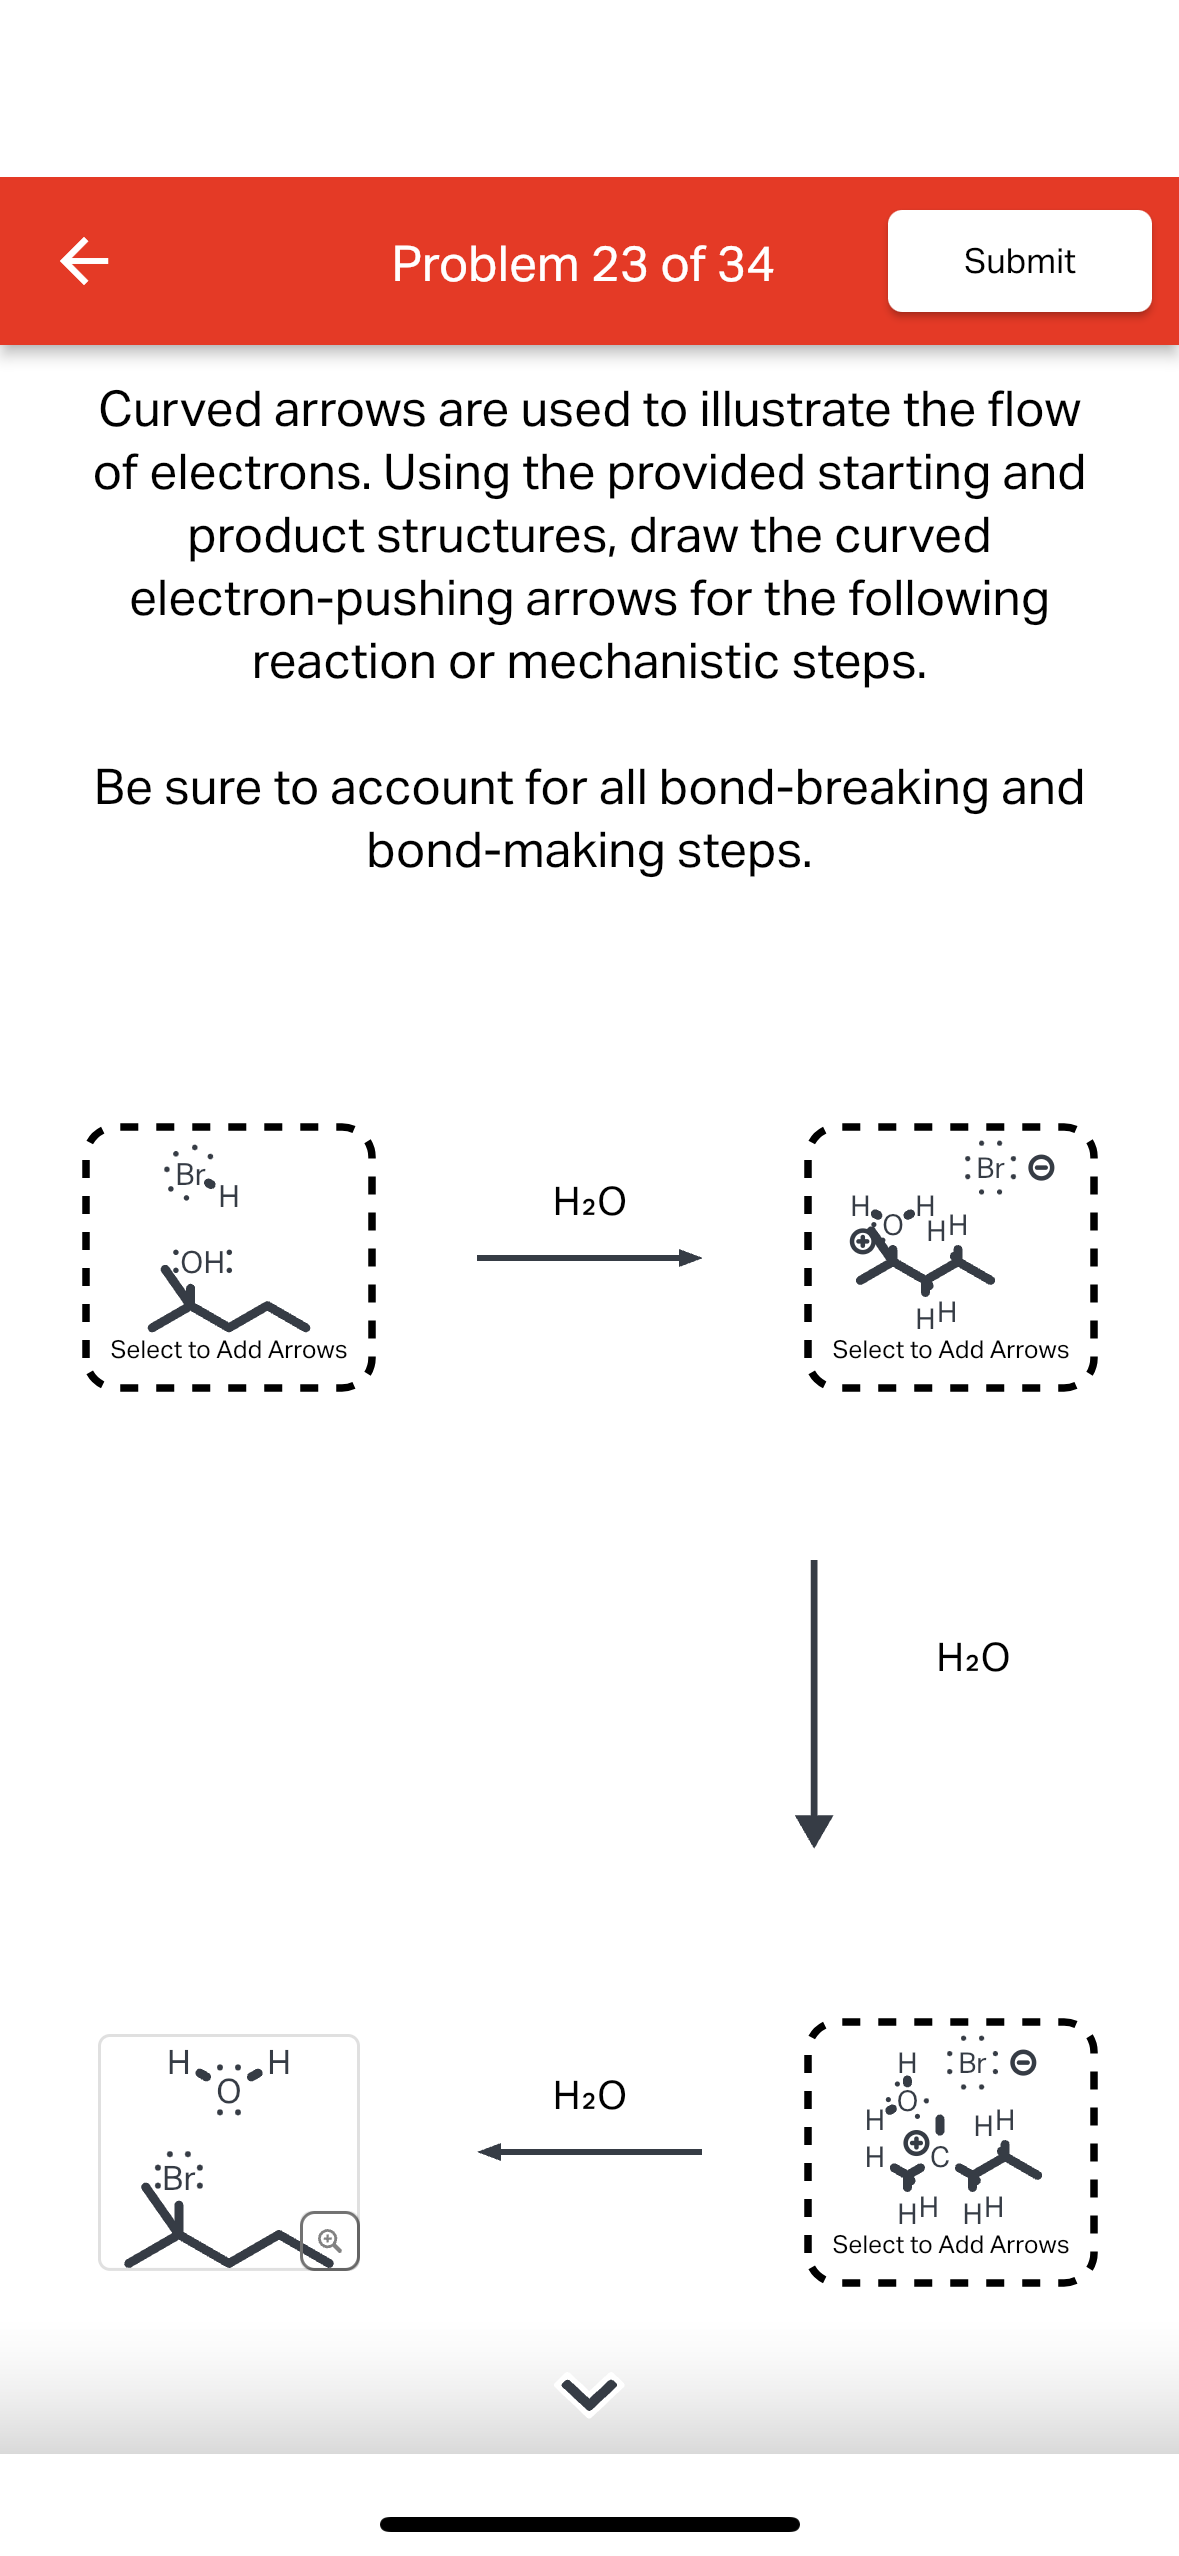 K
Curved arrows are used to illustrate the flow
of electrons. Using the provided starting and
product structures, draw the curved
electron-pushing arrows for the following
reaction or mechanistic steps.
•Br.H
OH:
Be sure to account for all bond-breaking and
bond-making steps.
Select to Add Arrows
Problem 23 of 34
H... H
O
Br:
H₂O
H₂O
Submit
H.
O•H
:Br: O
HH
НН
Select to Add Arrows
H₂O
:Br: O
HH
HH HH
Select to Add Arrows